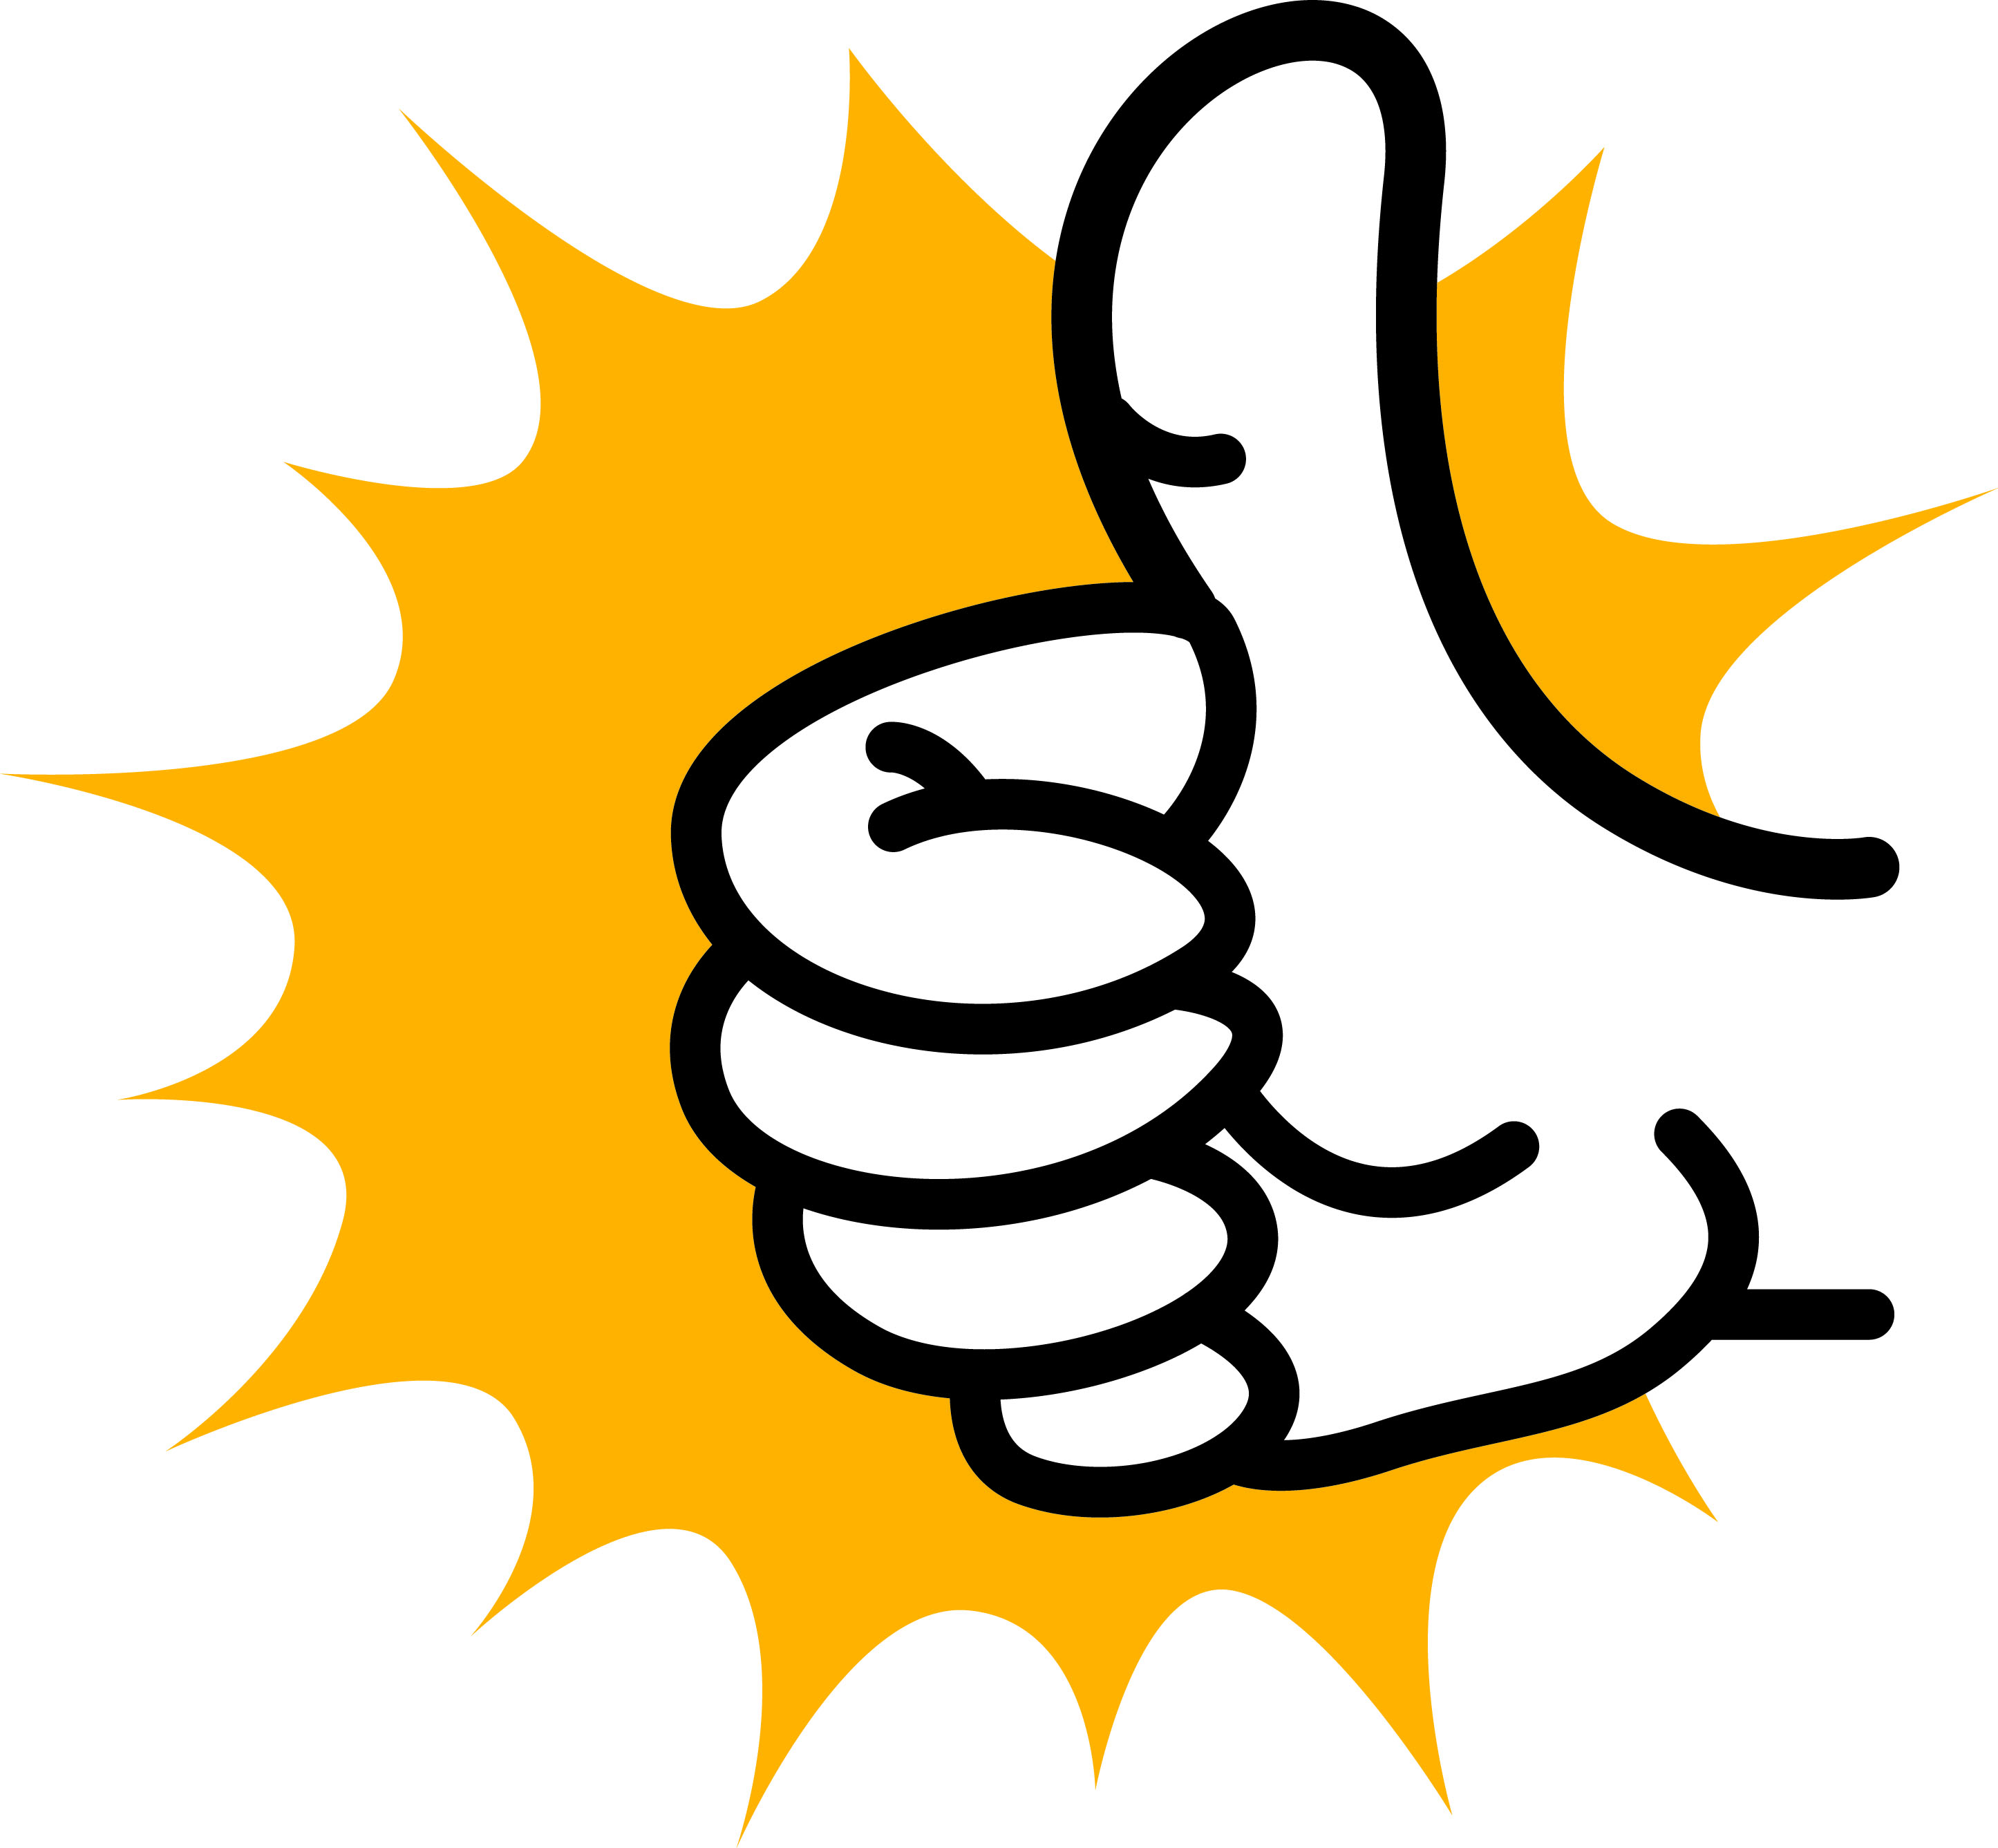 36 Thumbs Up Image   Free Cliparts That You Can Download To You